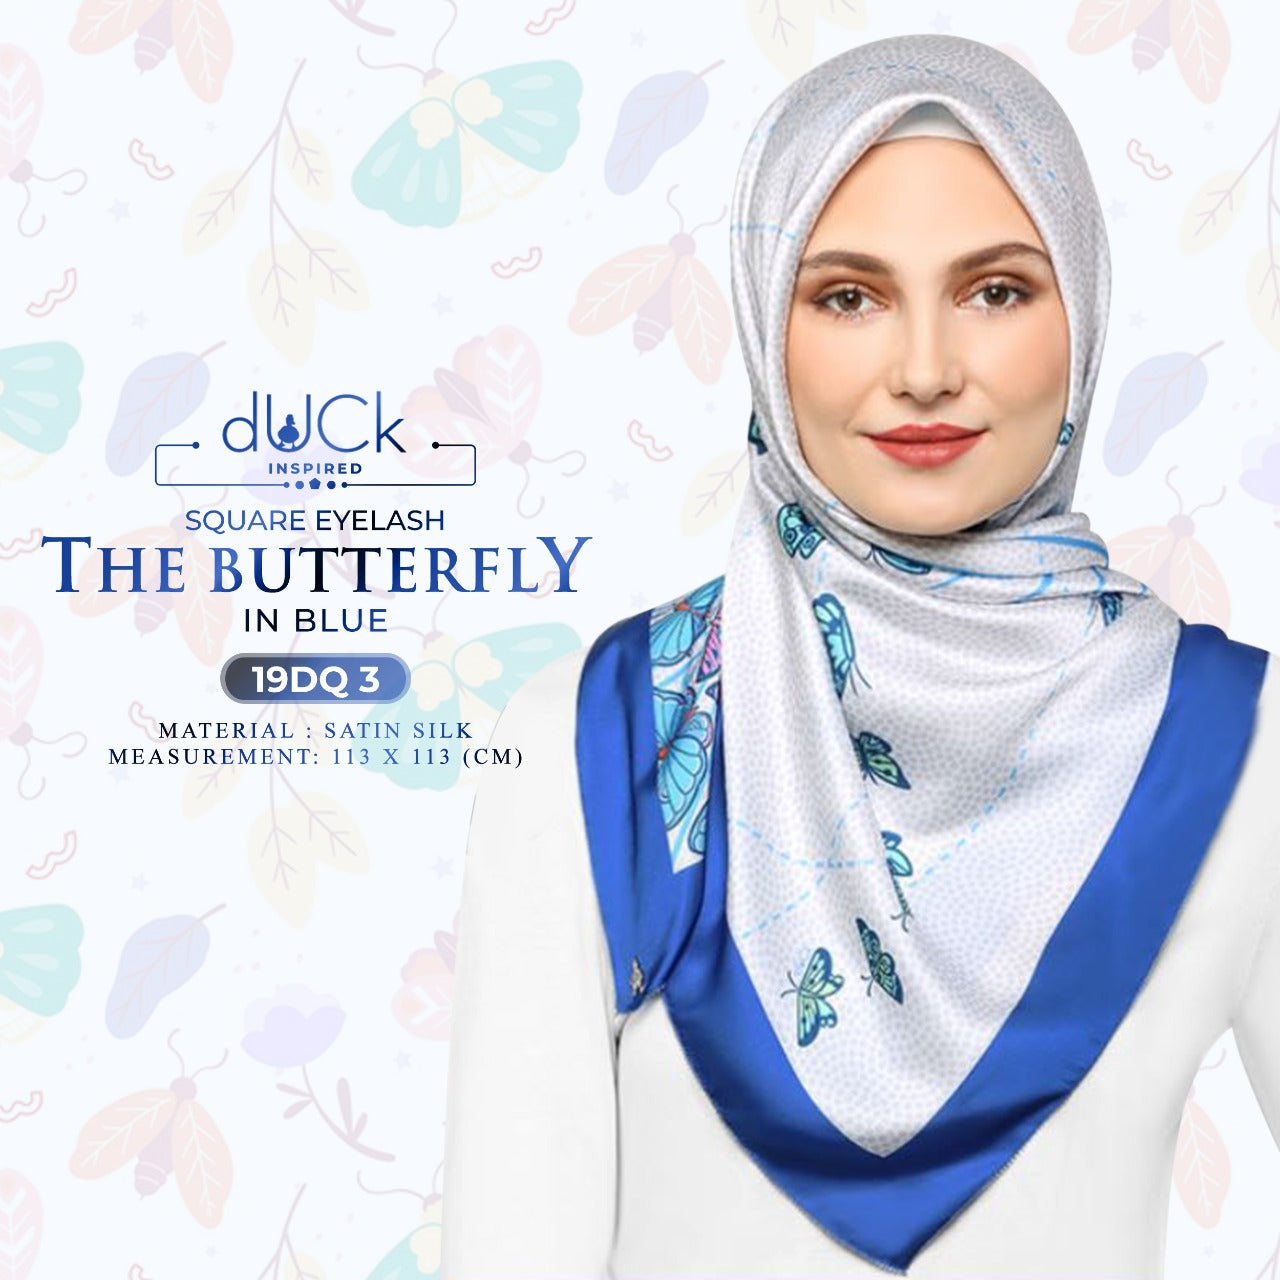 The dUCk Butterfly Square Eyelash Collection RM14